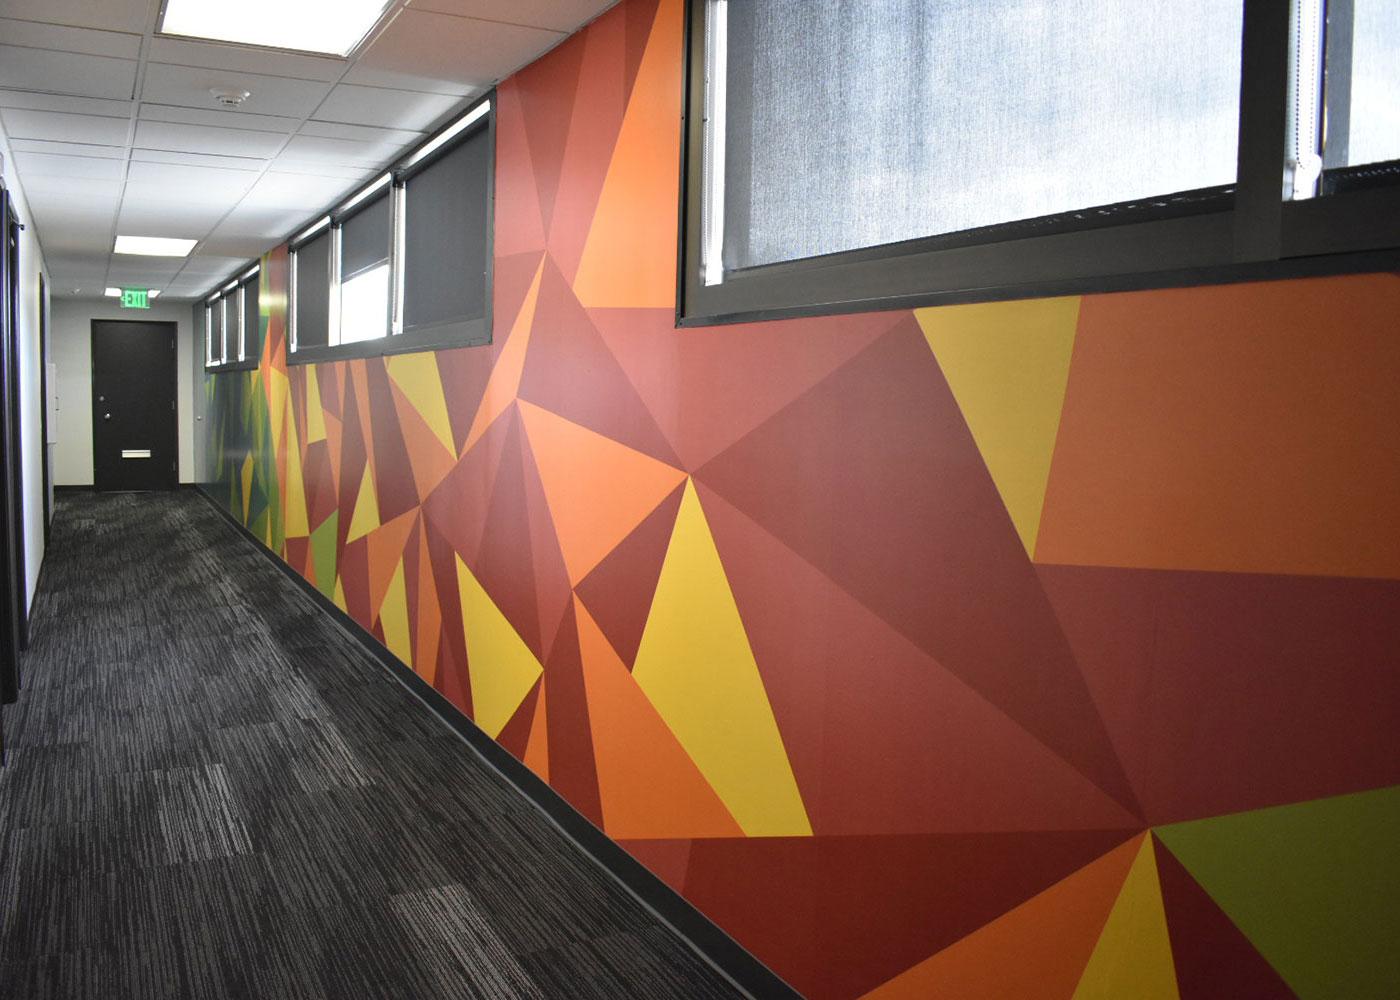 Multiple buildings received interior vinyl wall graphics in common space areas and long hallways featuring a variety of floor-to-ceiling designs.